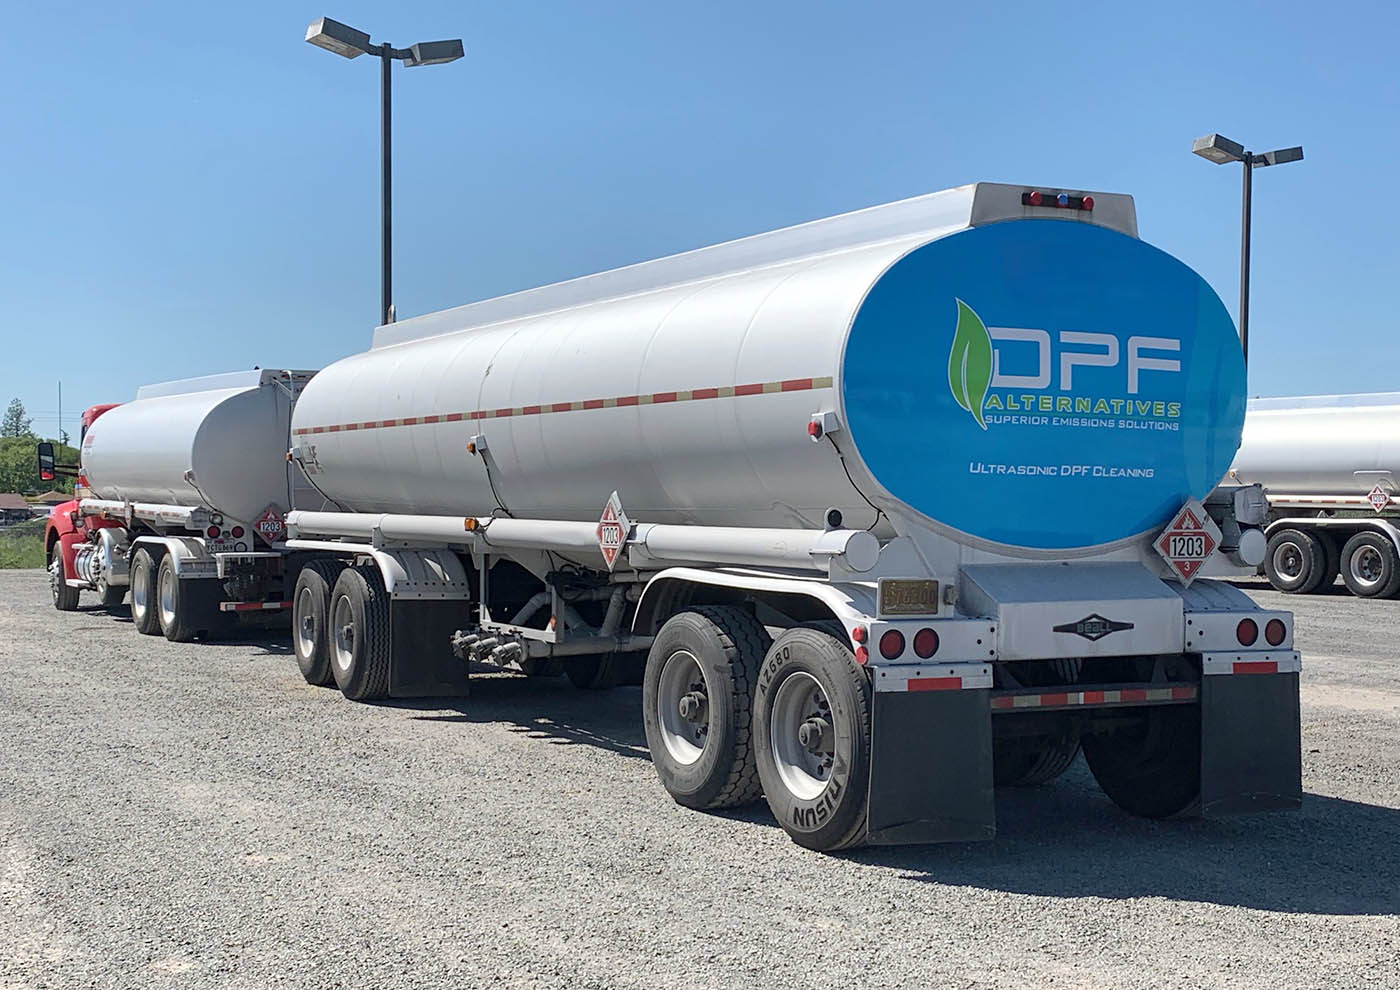 Back of a clean, large, reflective semi truck rig, contact DPF Alternatives for a DPF cleaning in Denver, CO.